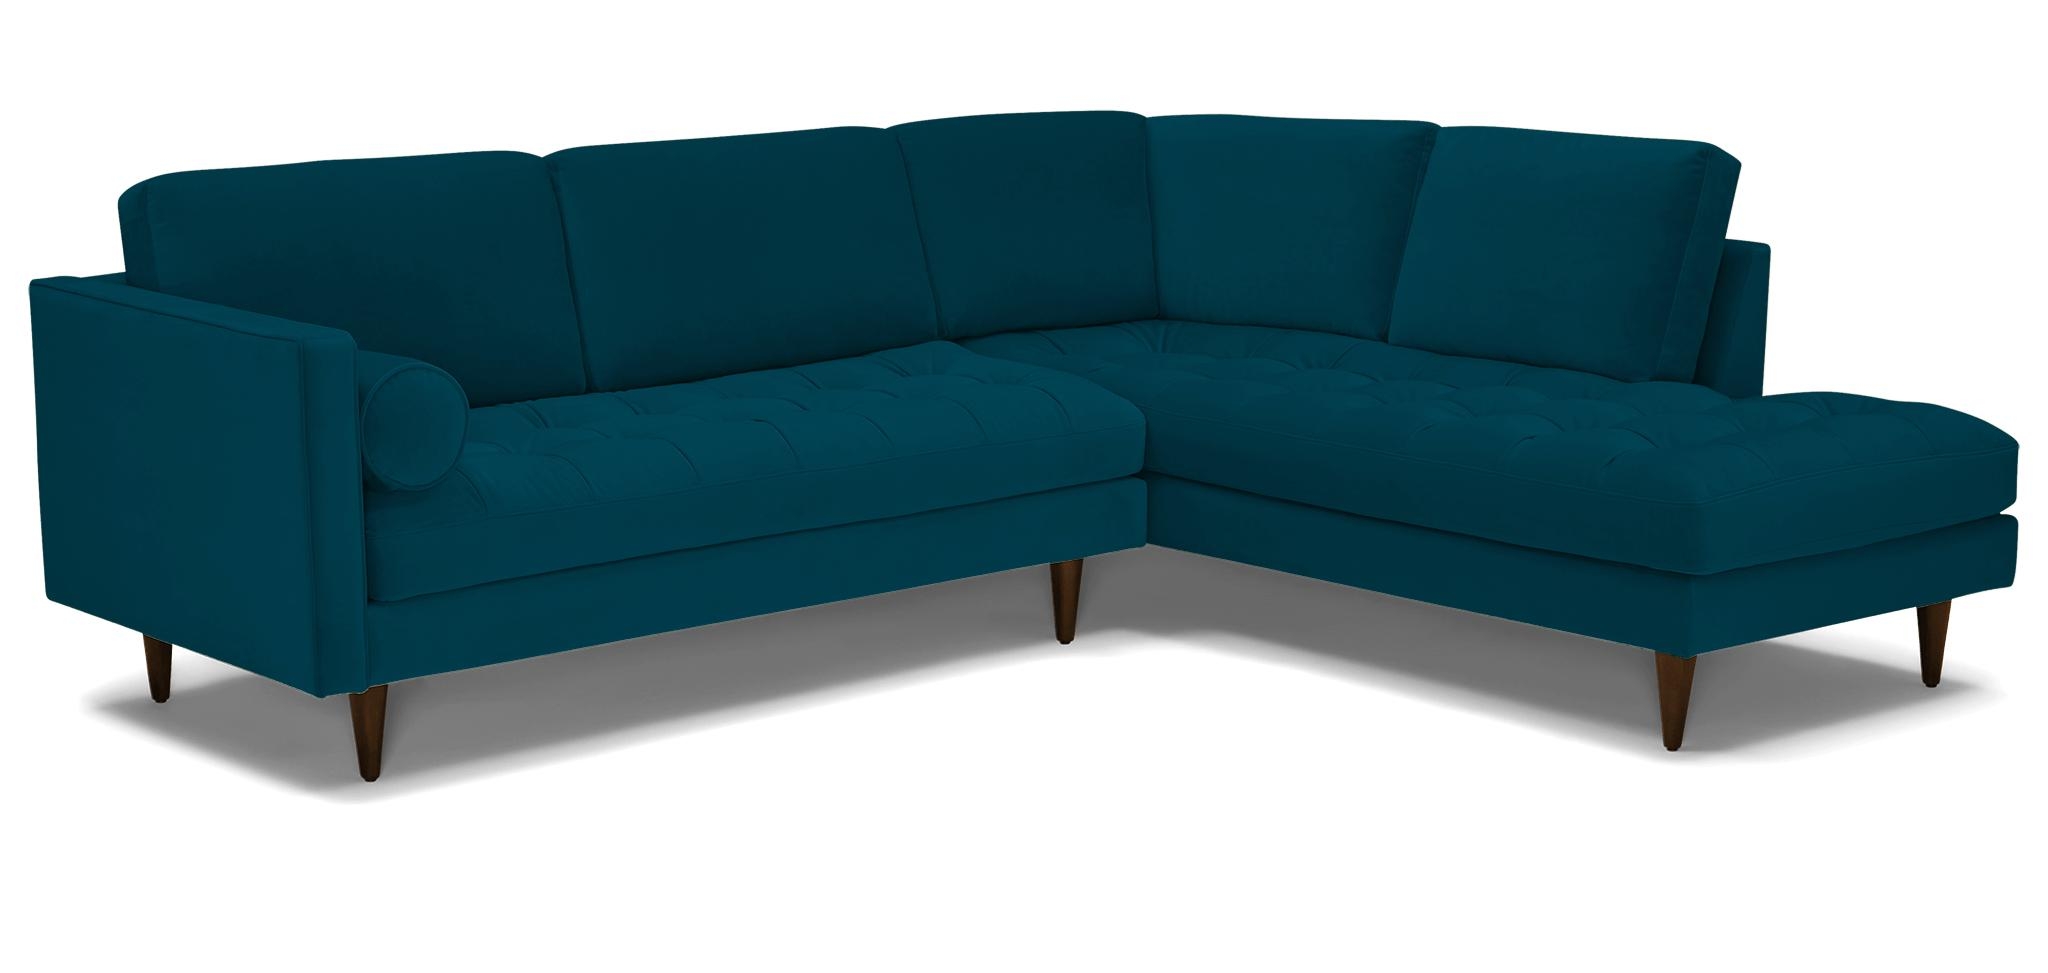 Blue Briar Mid Century Modern Sectional with Bumper - Key Largo Zenith Teal - Mocha - Right  - Image 1